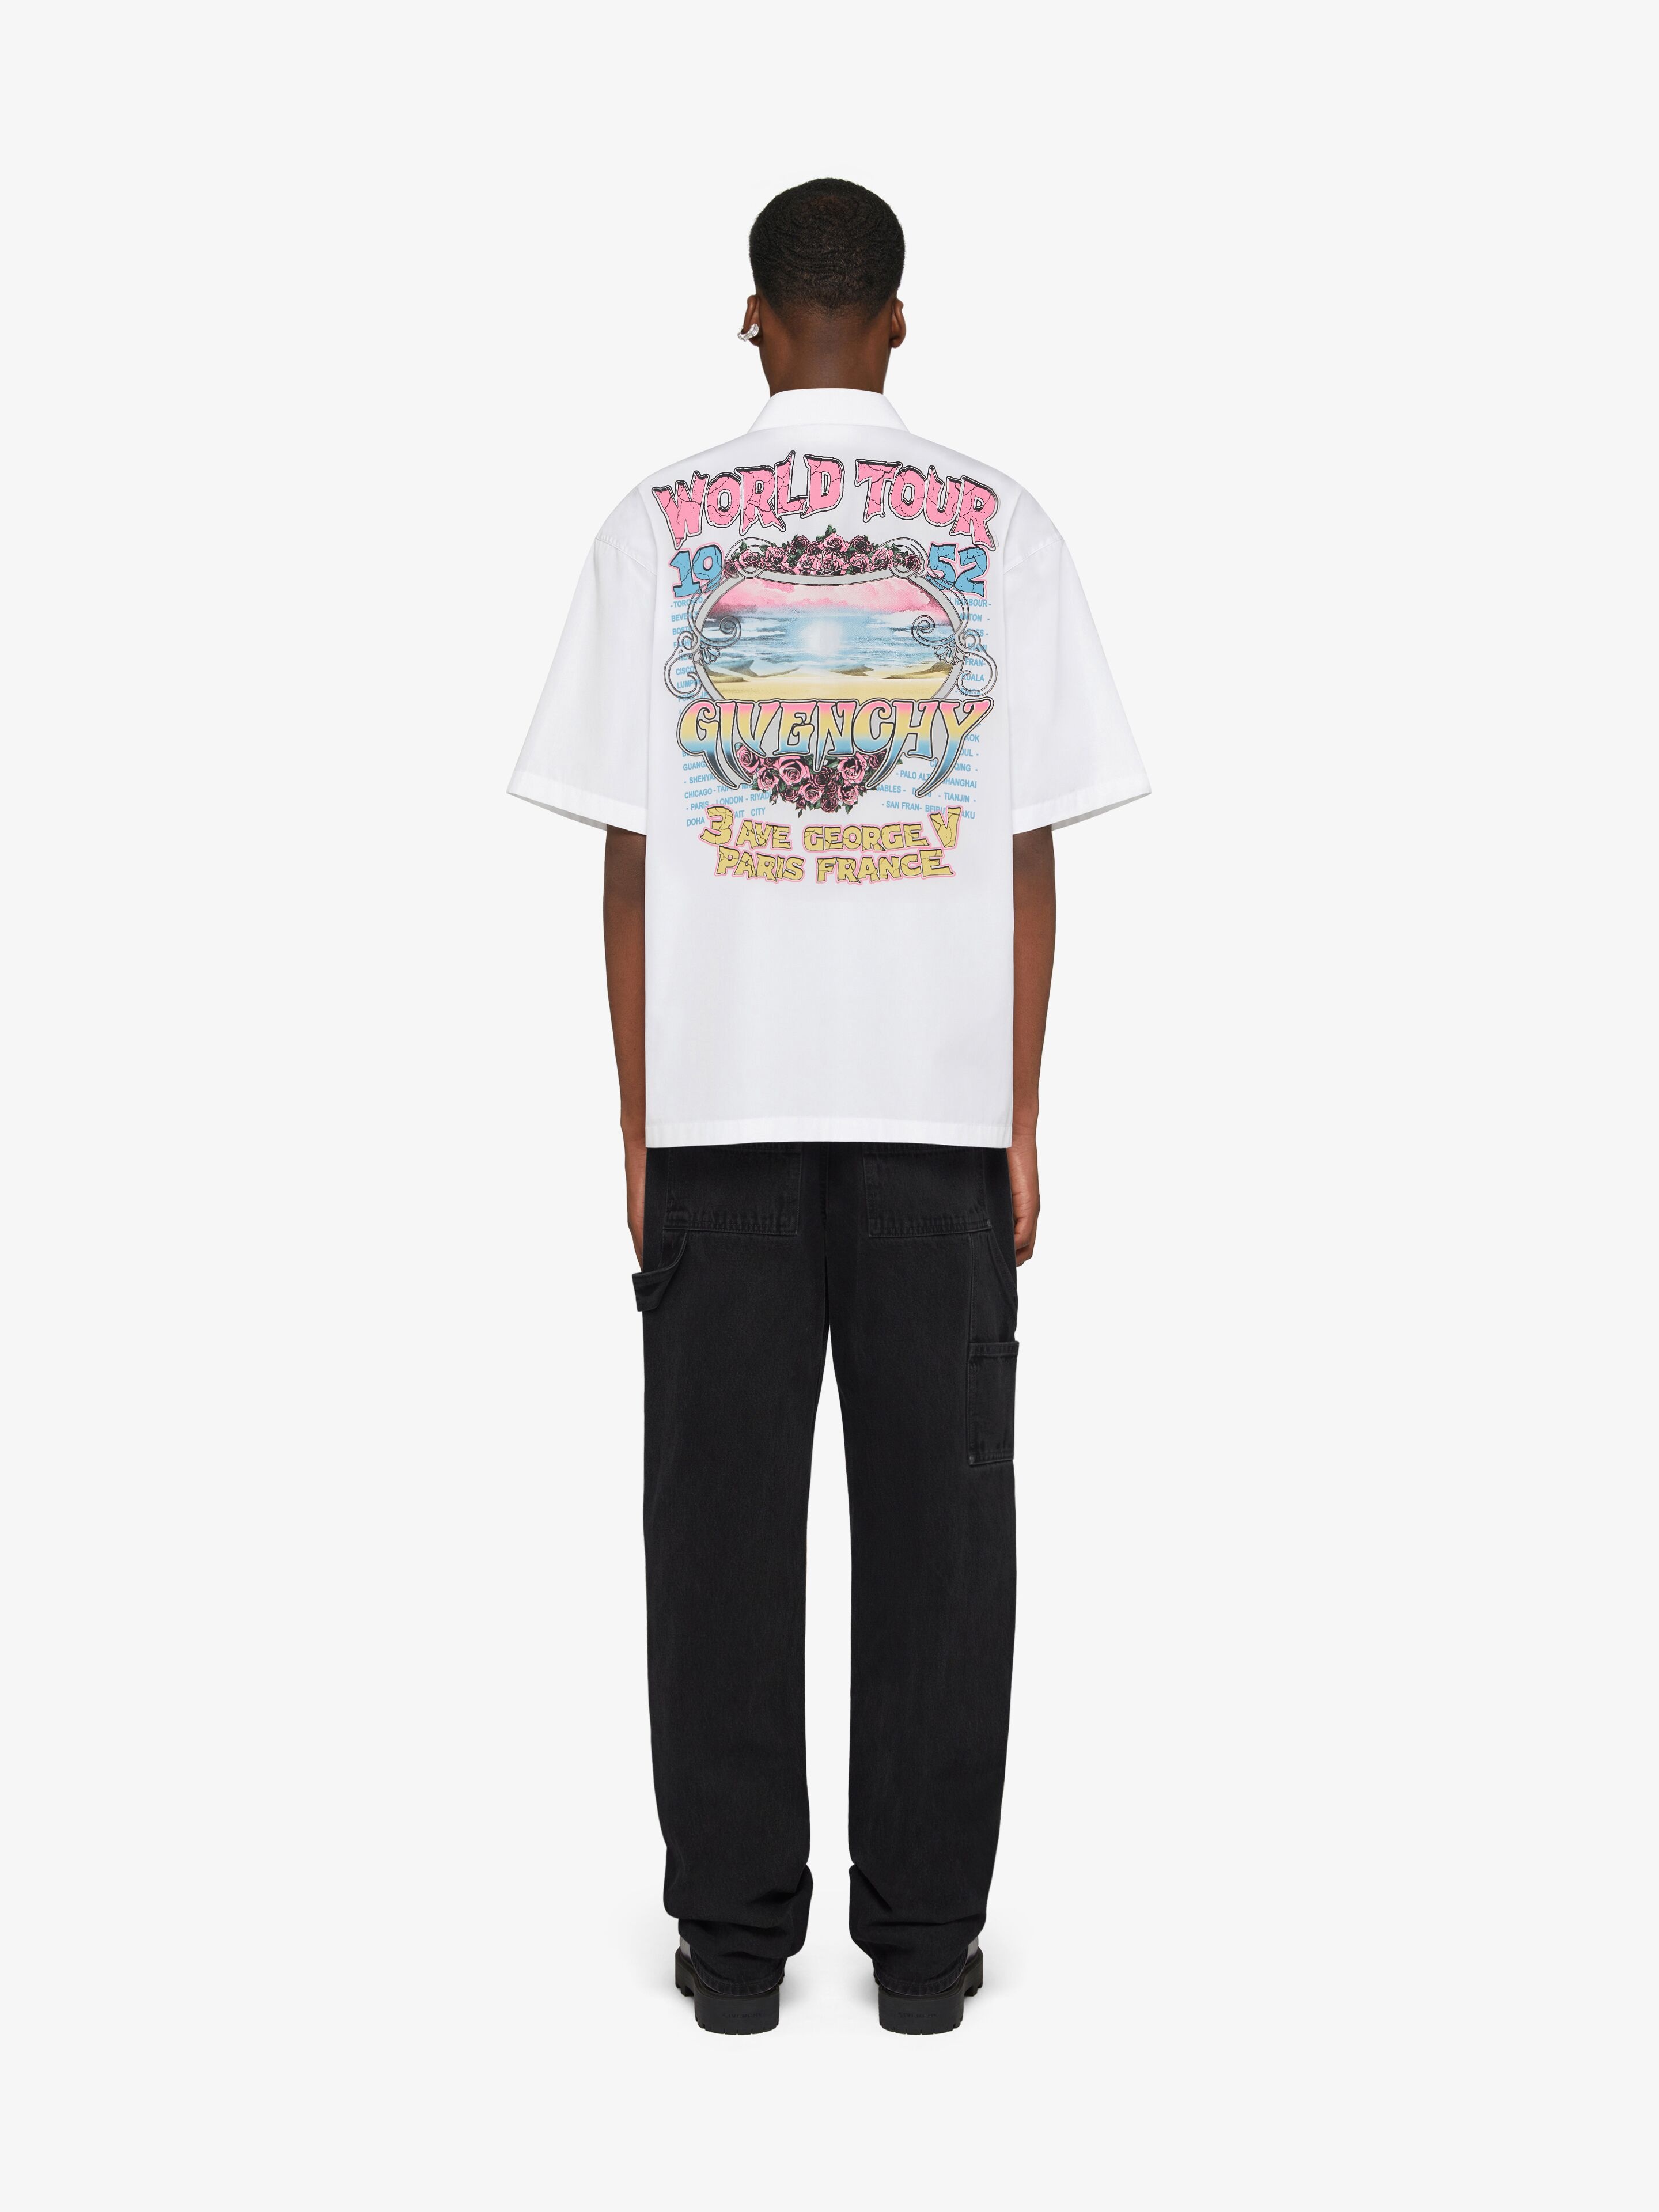 SHIRT IN POPLIN WITH GIVENCHY WORLD TOUR PRINT - 4